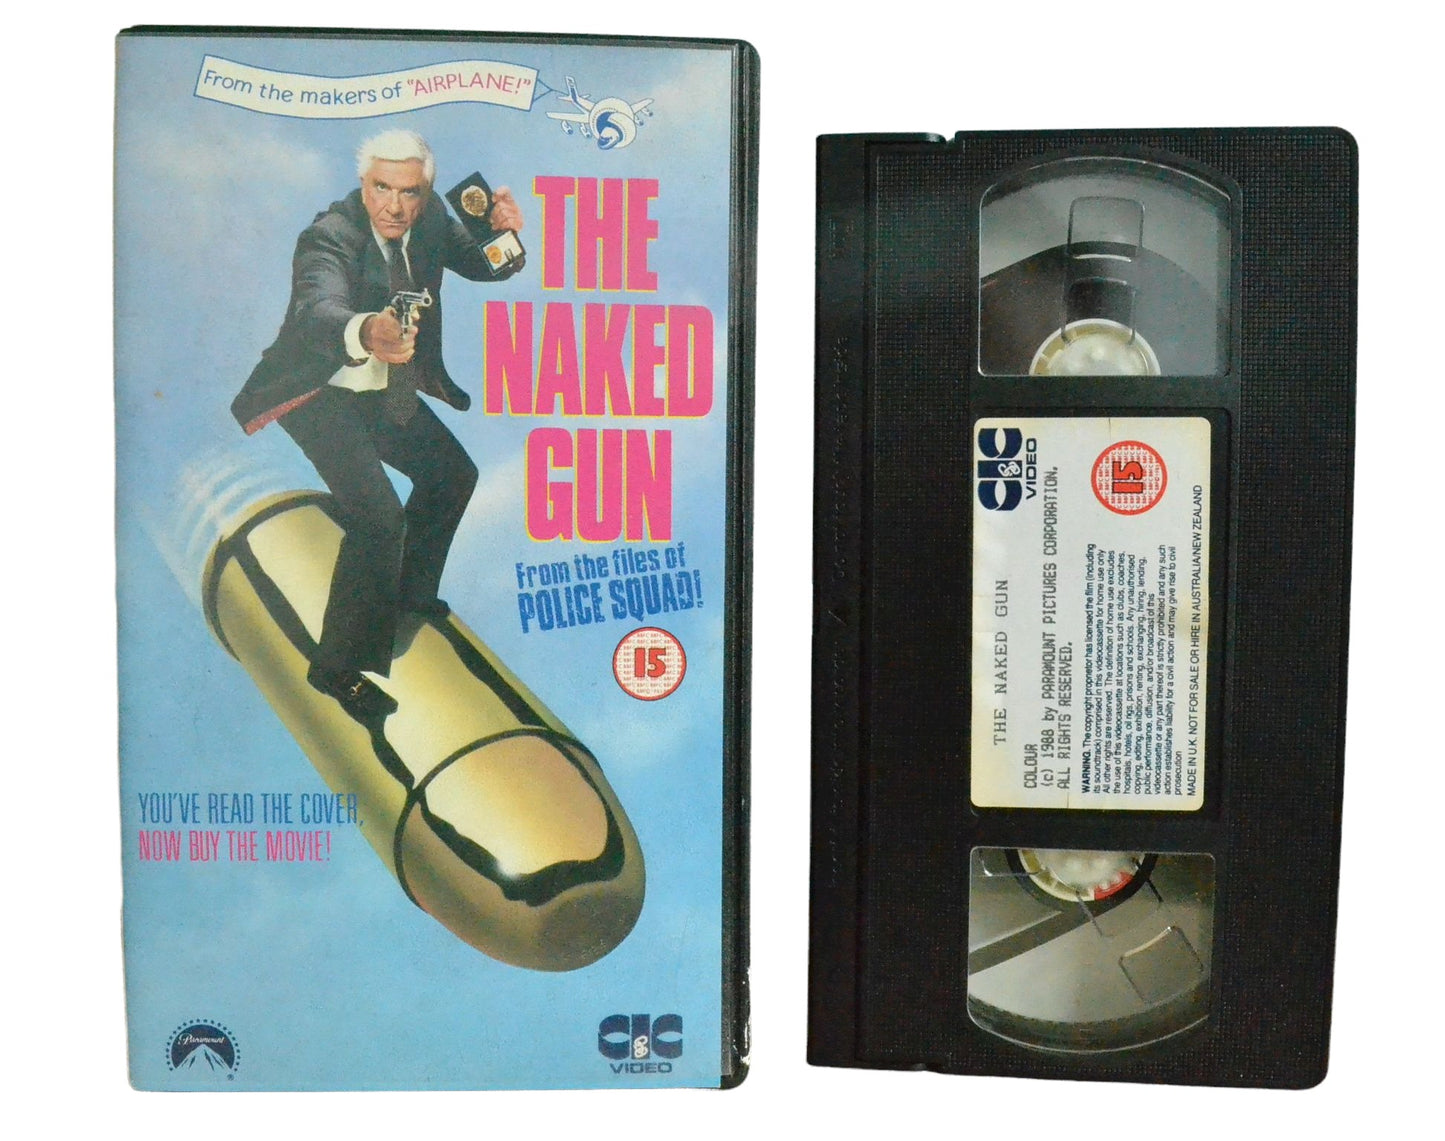 The Naked Gun: From the Files of Police Squad! - Leslie Nielsen - CIC Video - Vintage - Pal VHS-